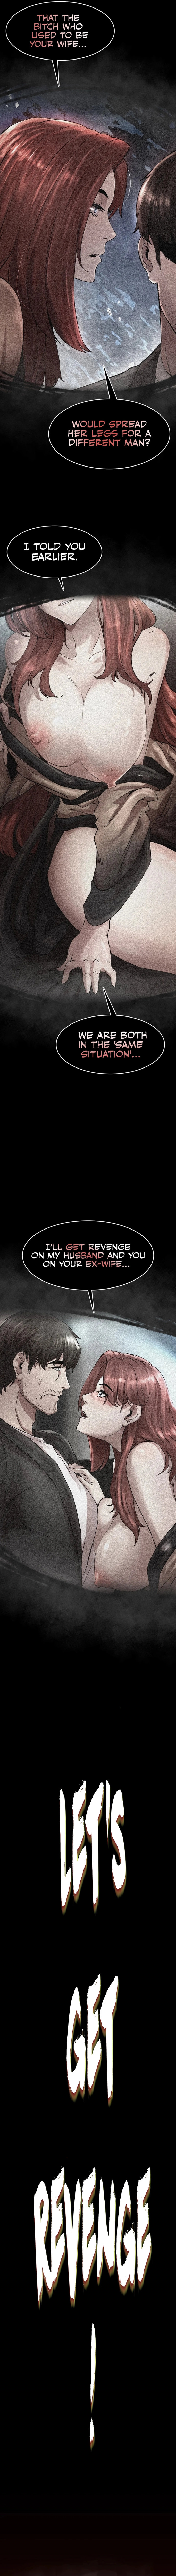 Revenge Chapter 2 - Page 28